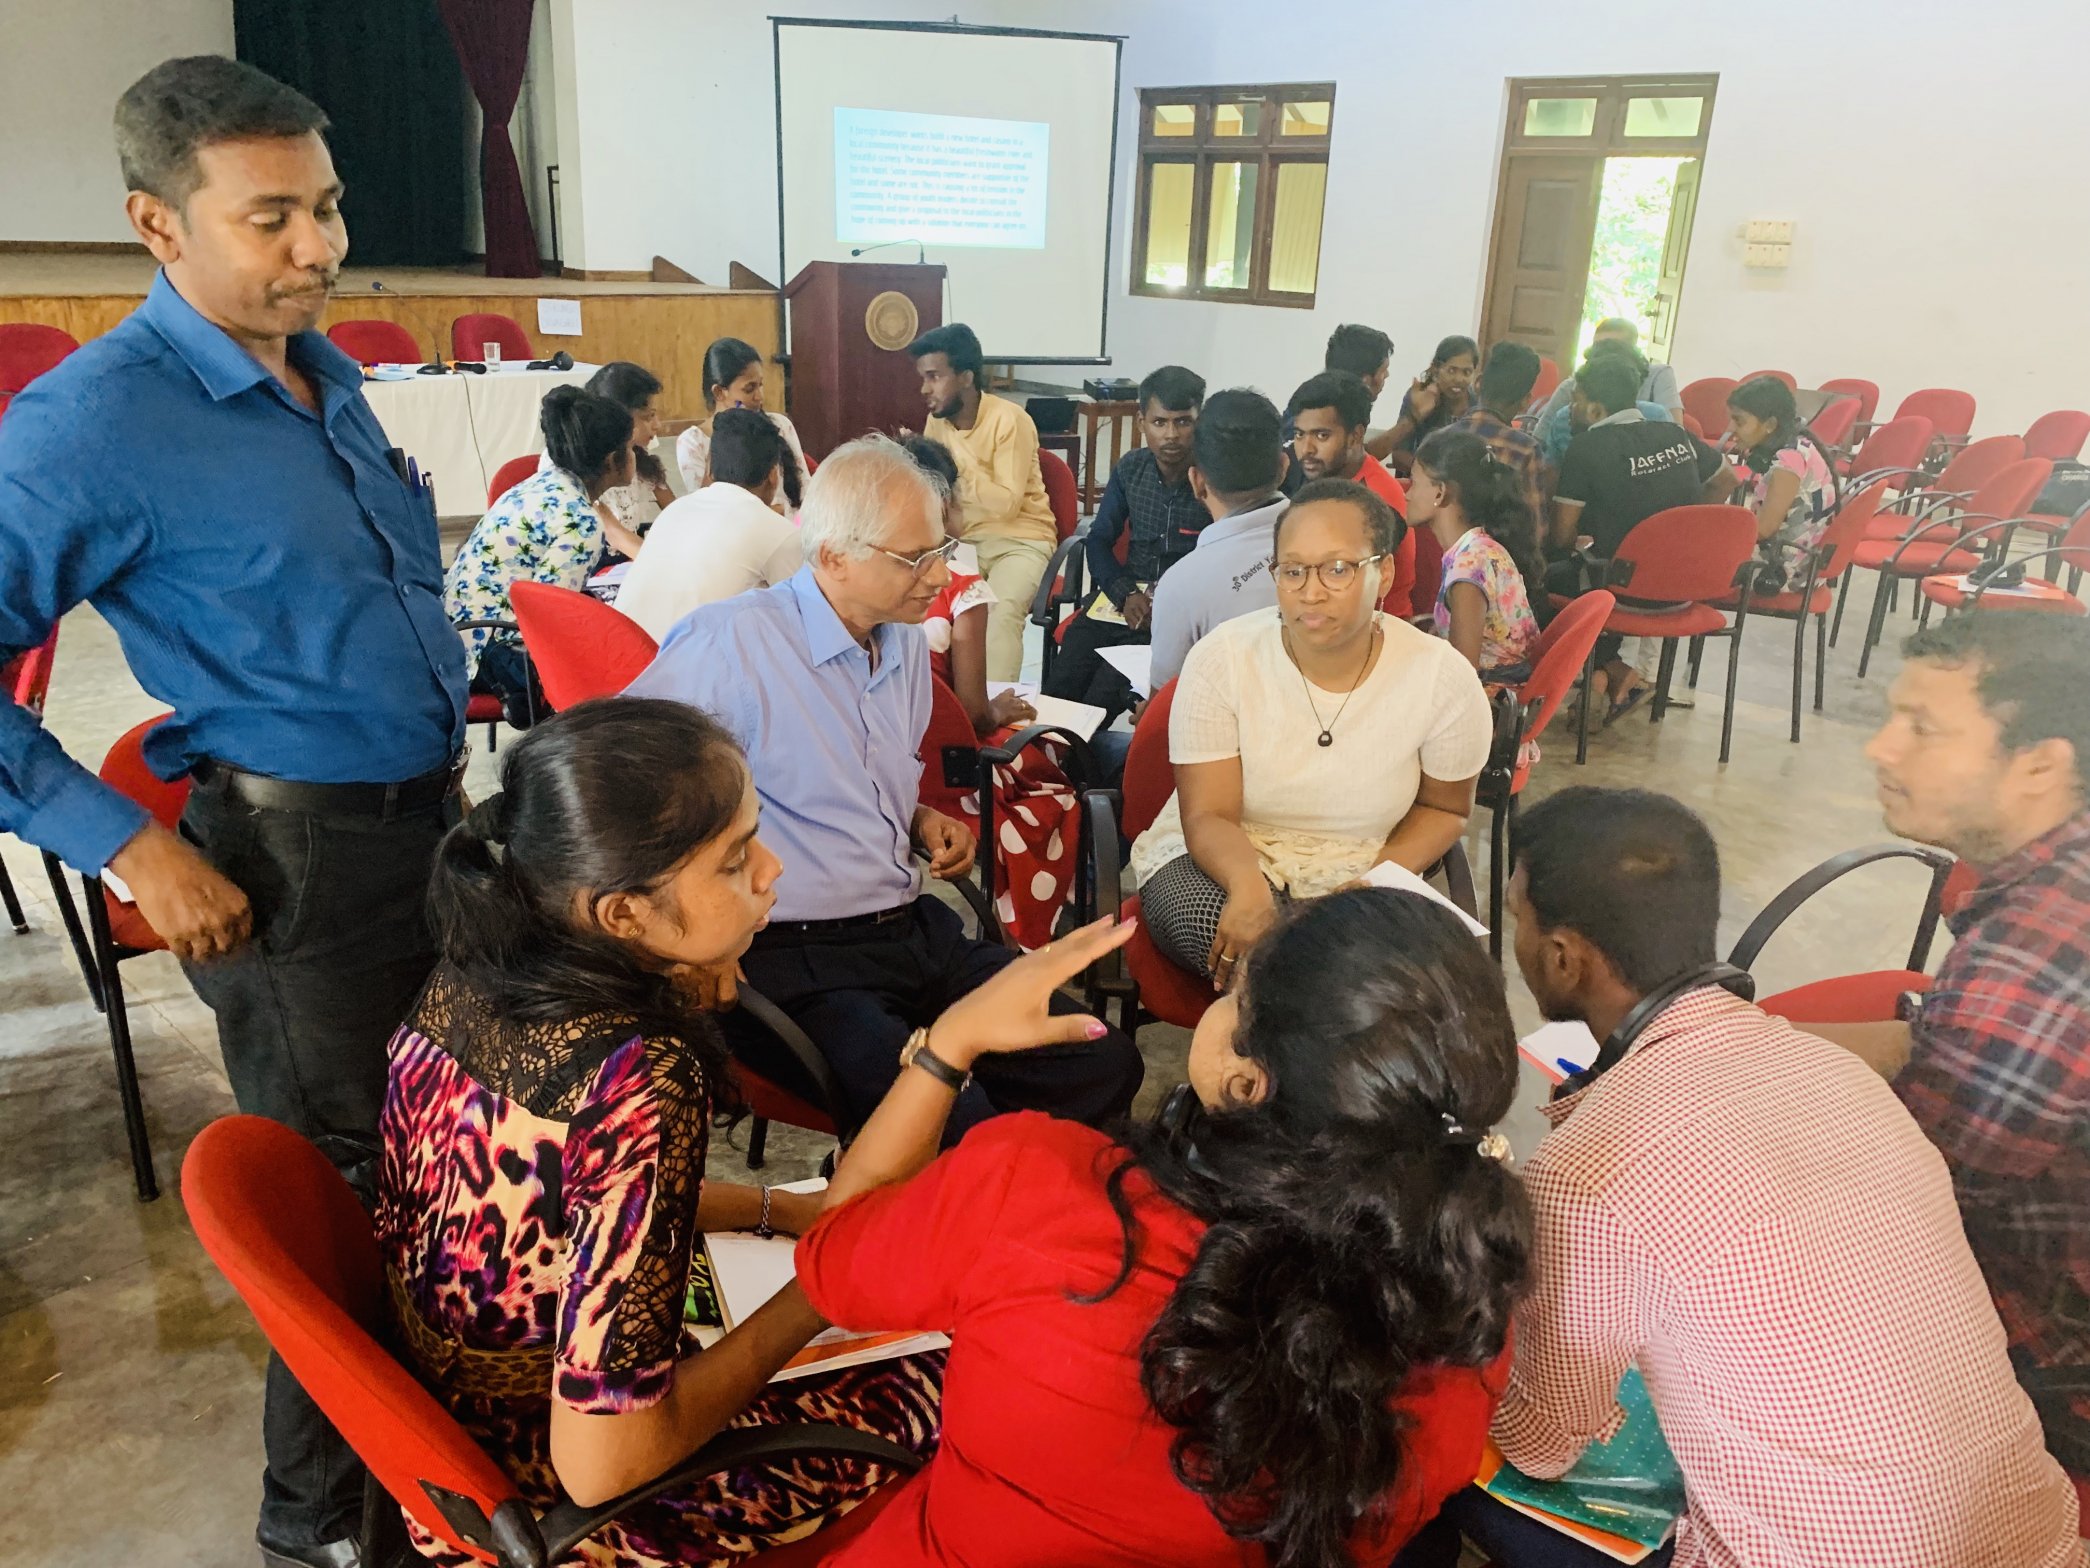 Fellows participated in breakout sessions throughout the week to brainstorm their citizen participation campaigns based on a challenge that they have identified in their community.